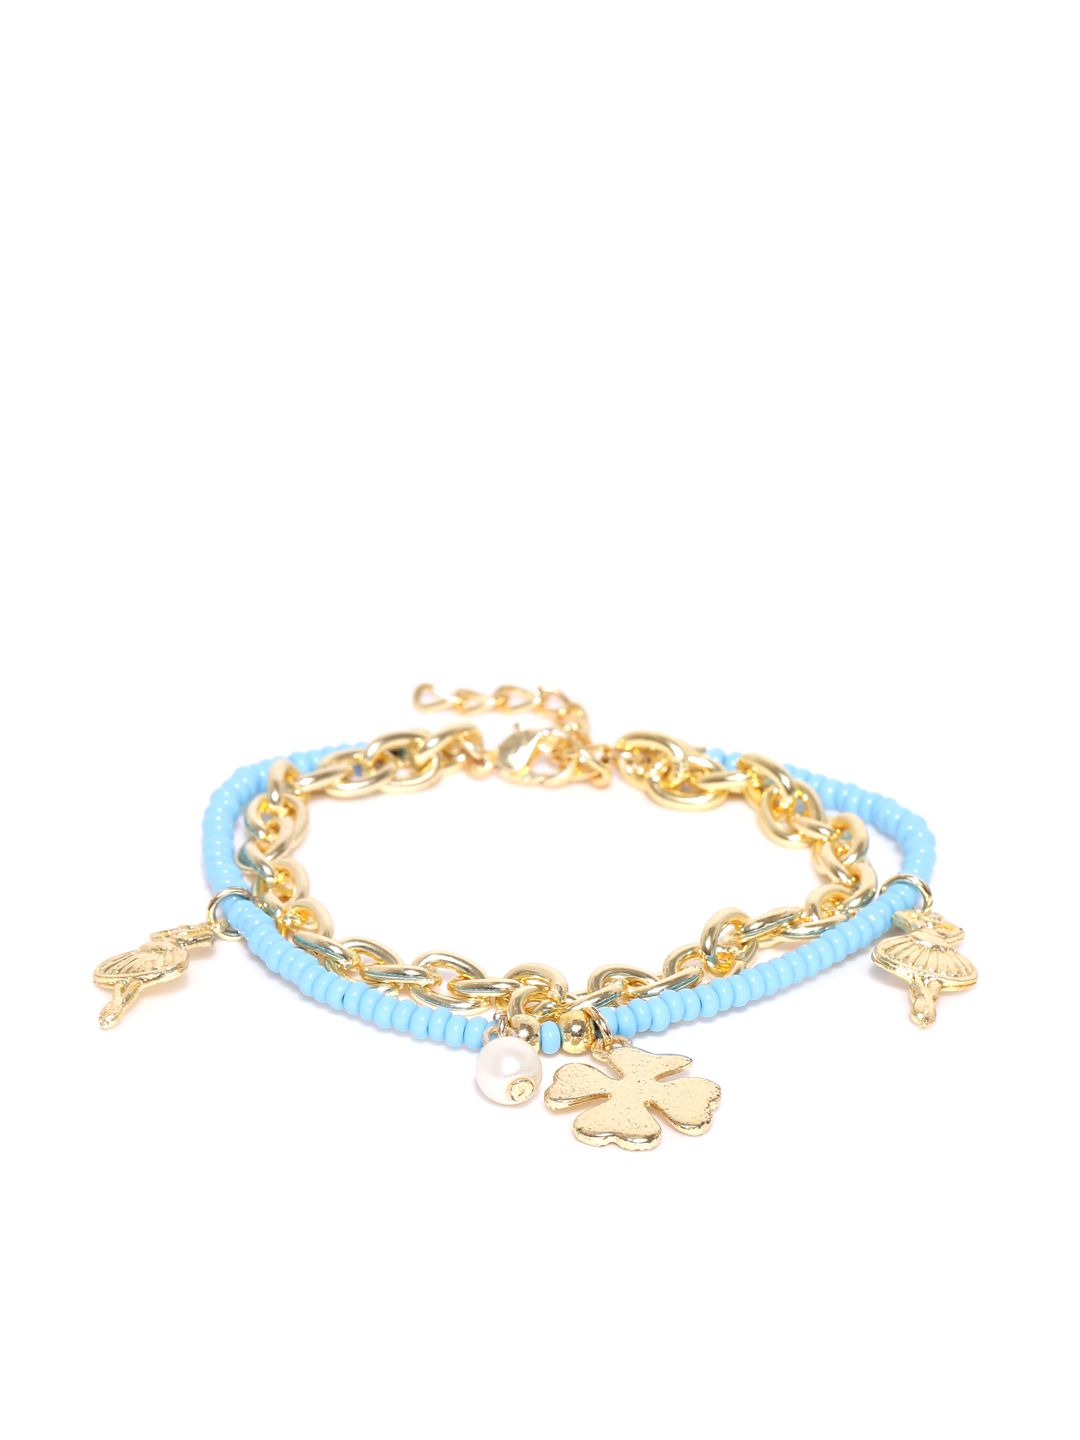 Crunchy Fashion Gold-Toned & Blue Charm Bracelet Price in India